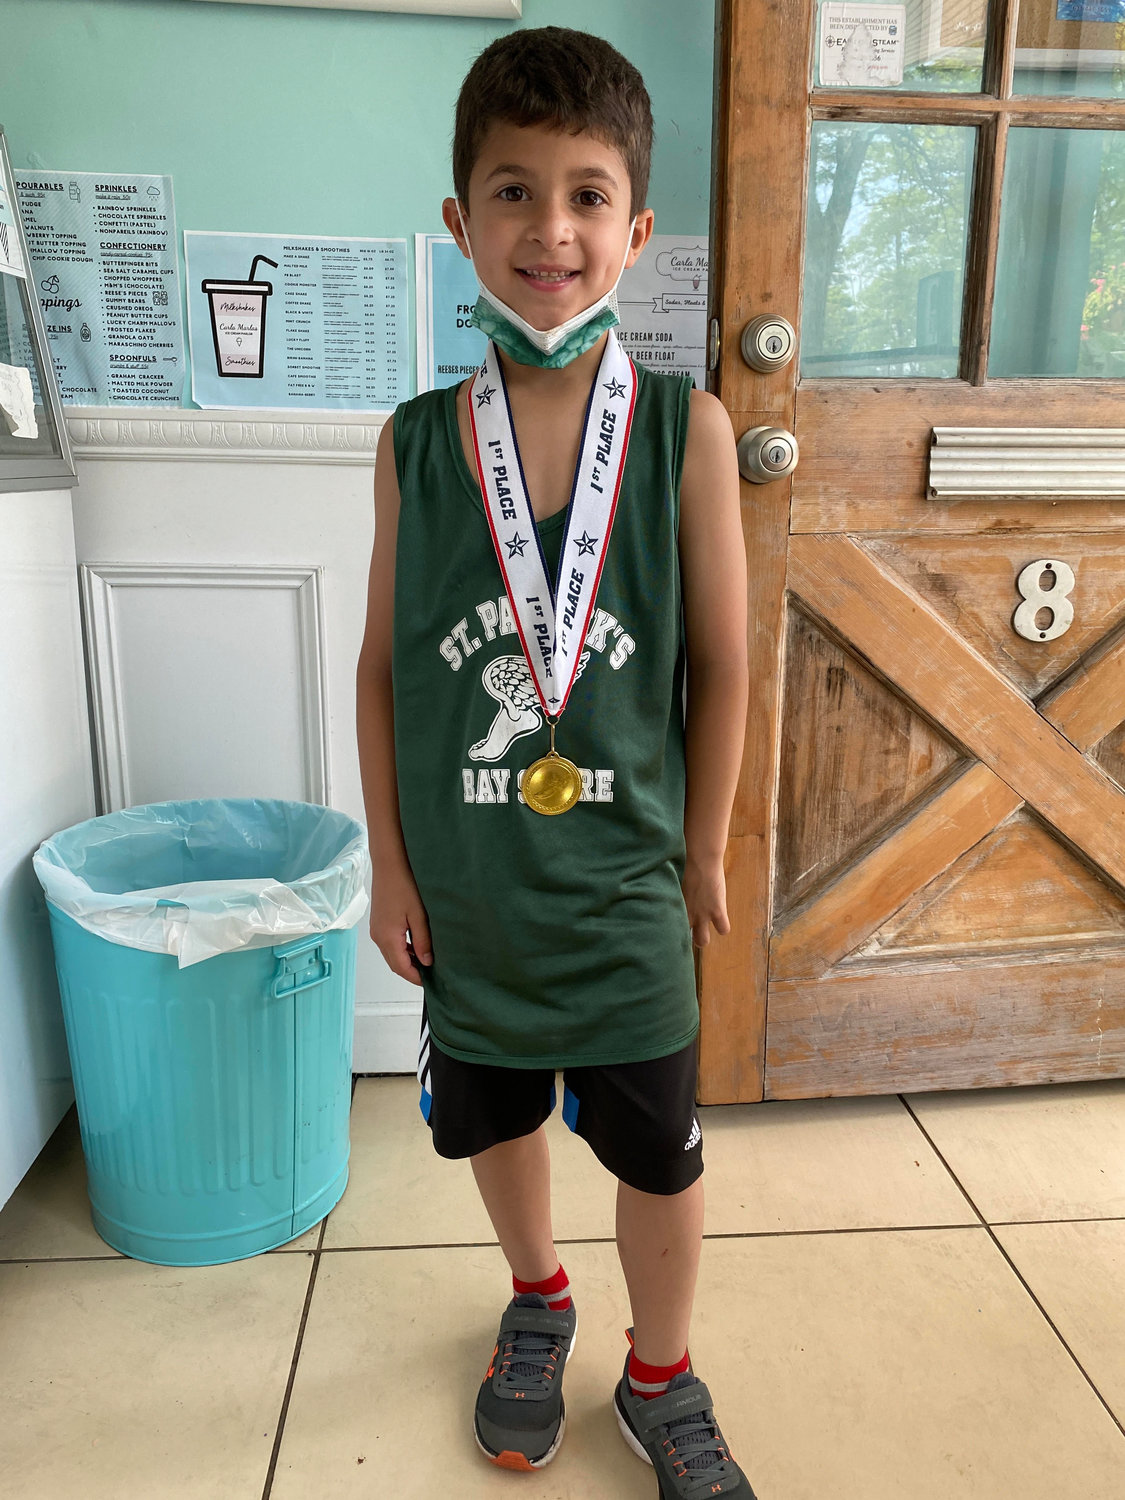 Tony Anitra Jr. won his track meet and celebrated his victory with ice cream at Carla Marlas in Bellport. His father, also Tony, picked Carla Marlas because it was the first ice cream shop to come up on his GPS.